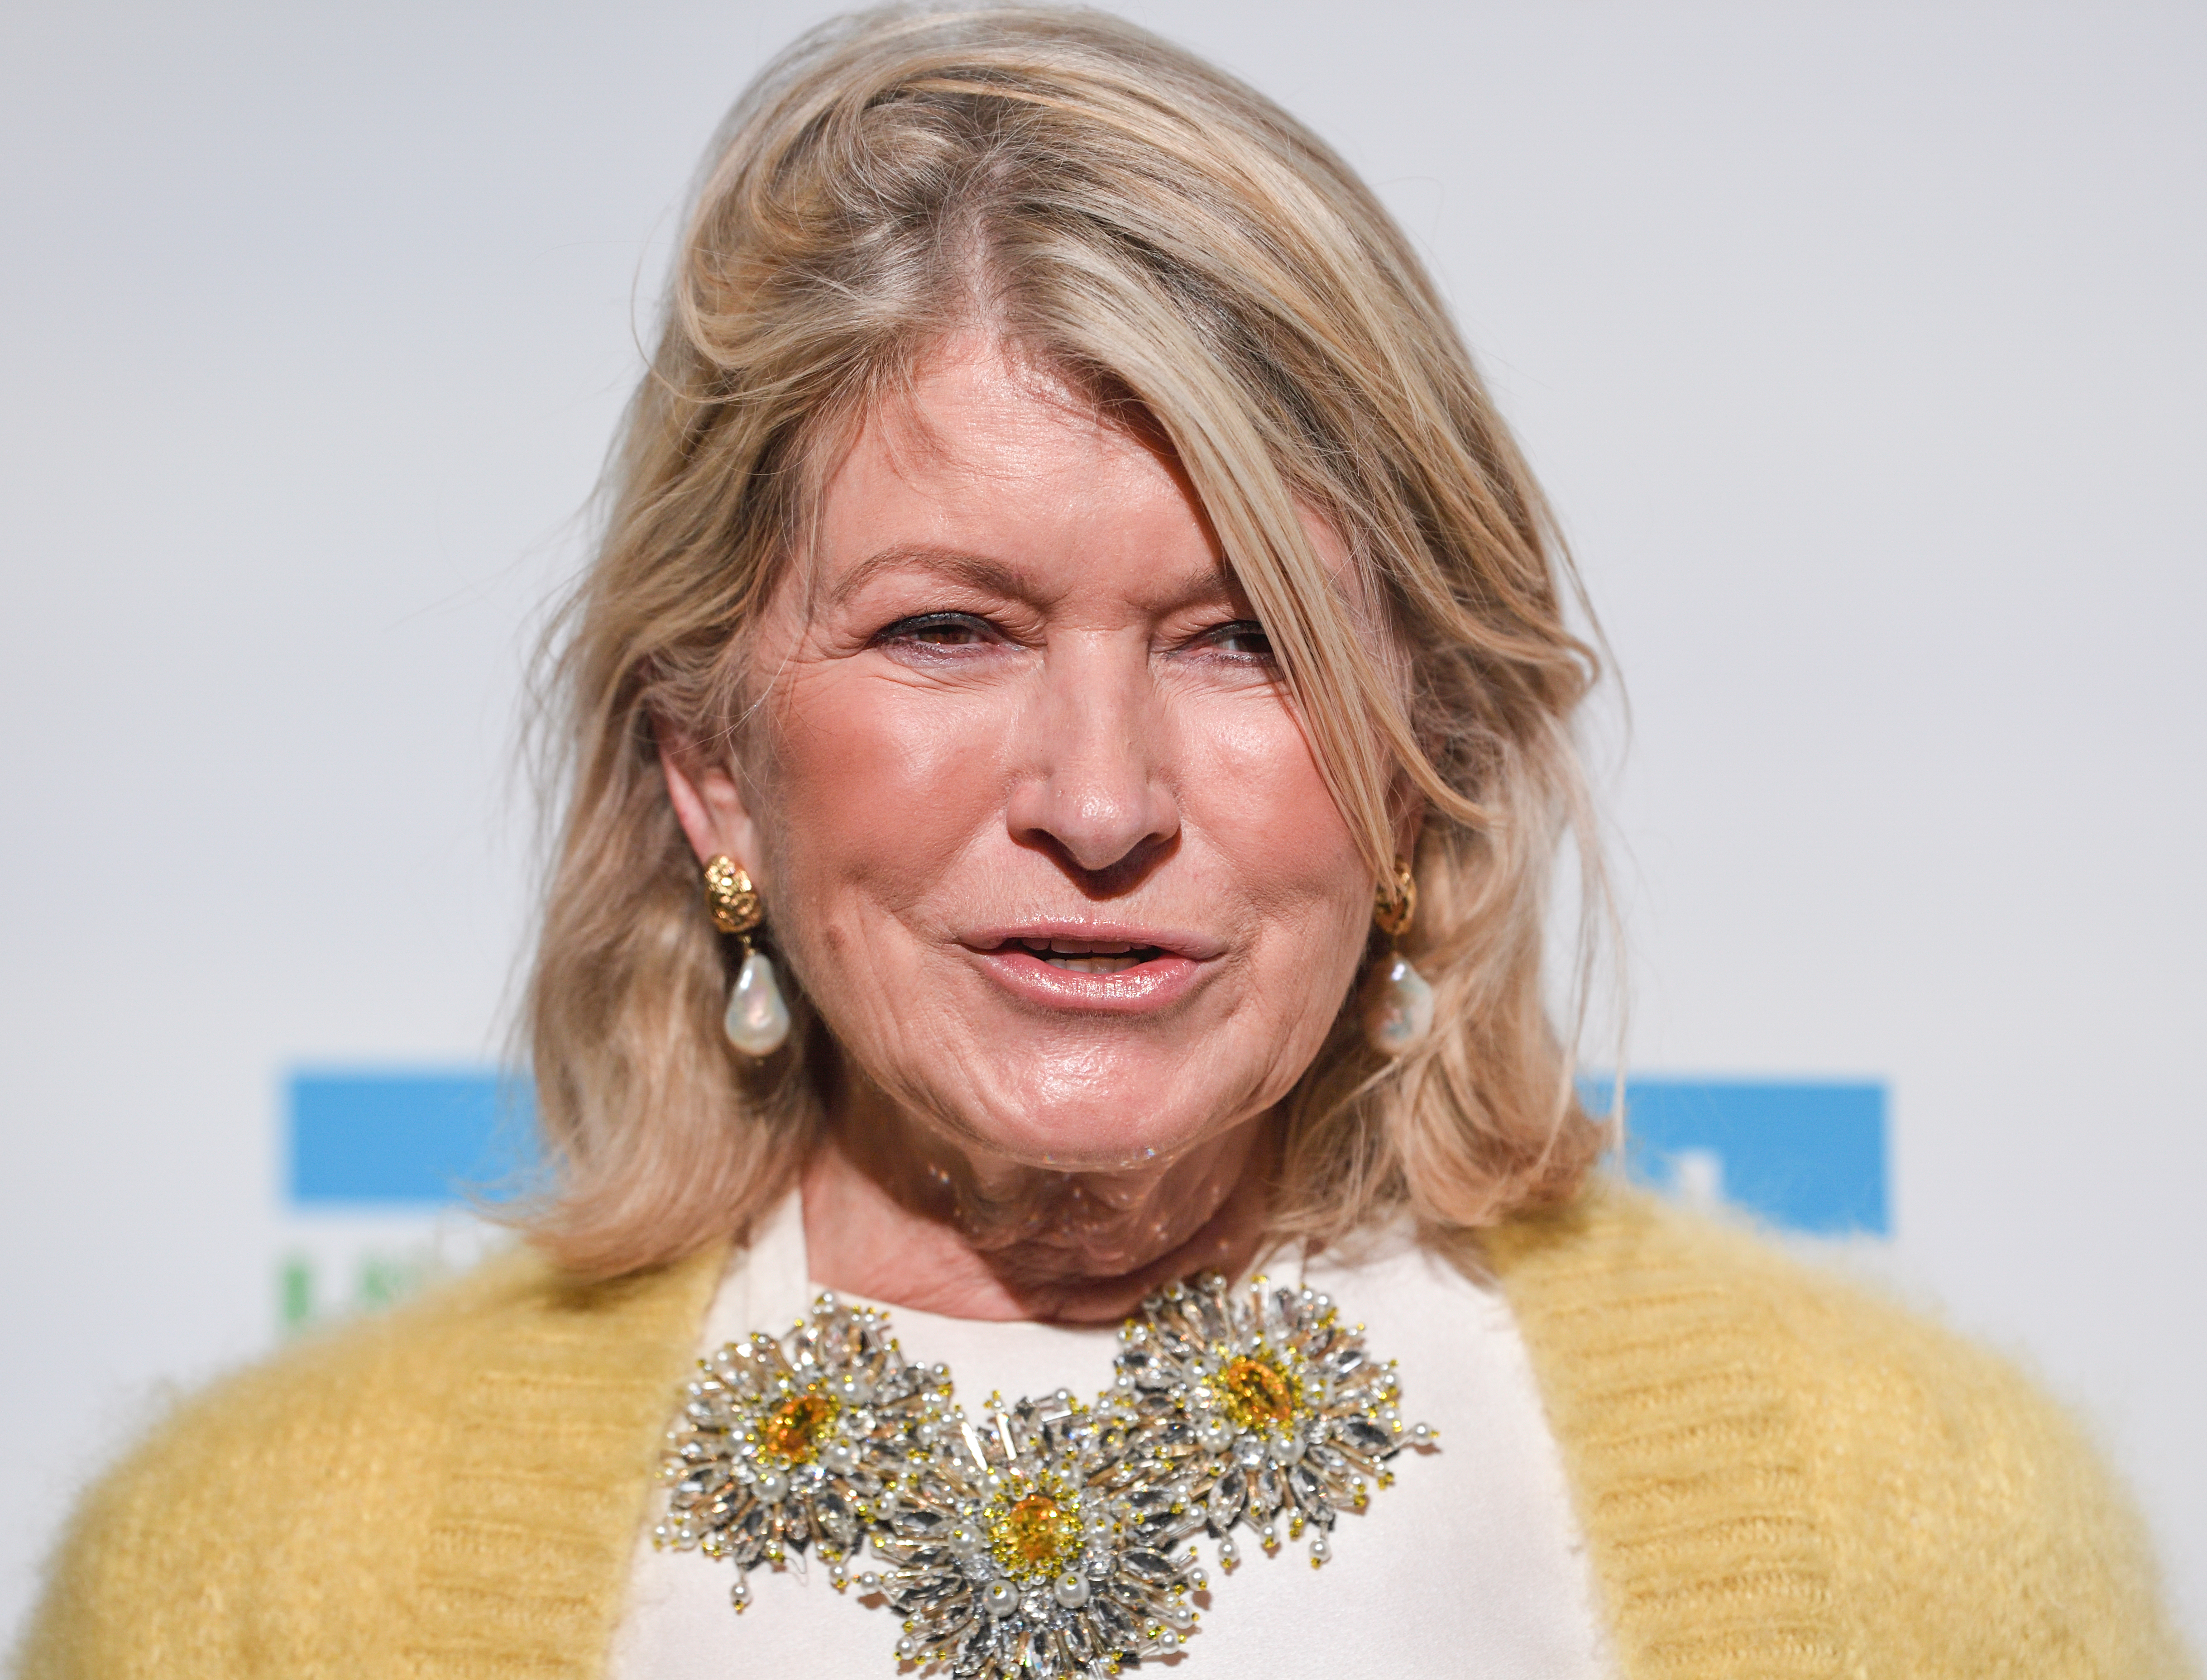 Celebrity Martha Stewart, 81 appears on Sports Illustrated cover, web fans have mixed reactions